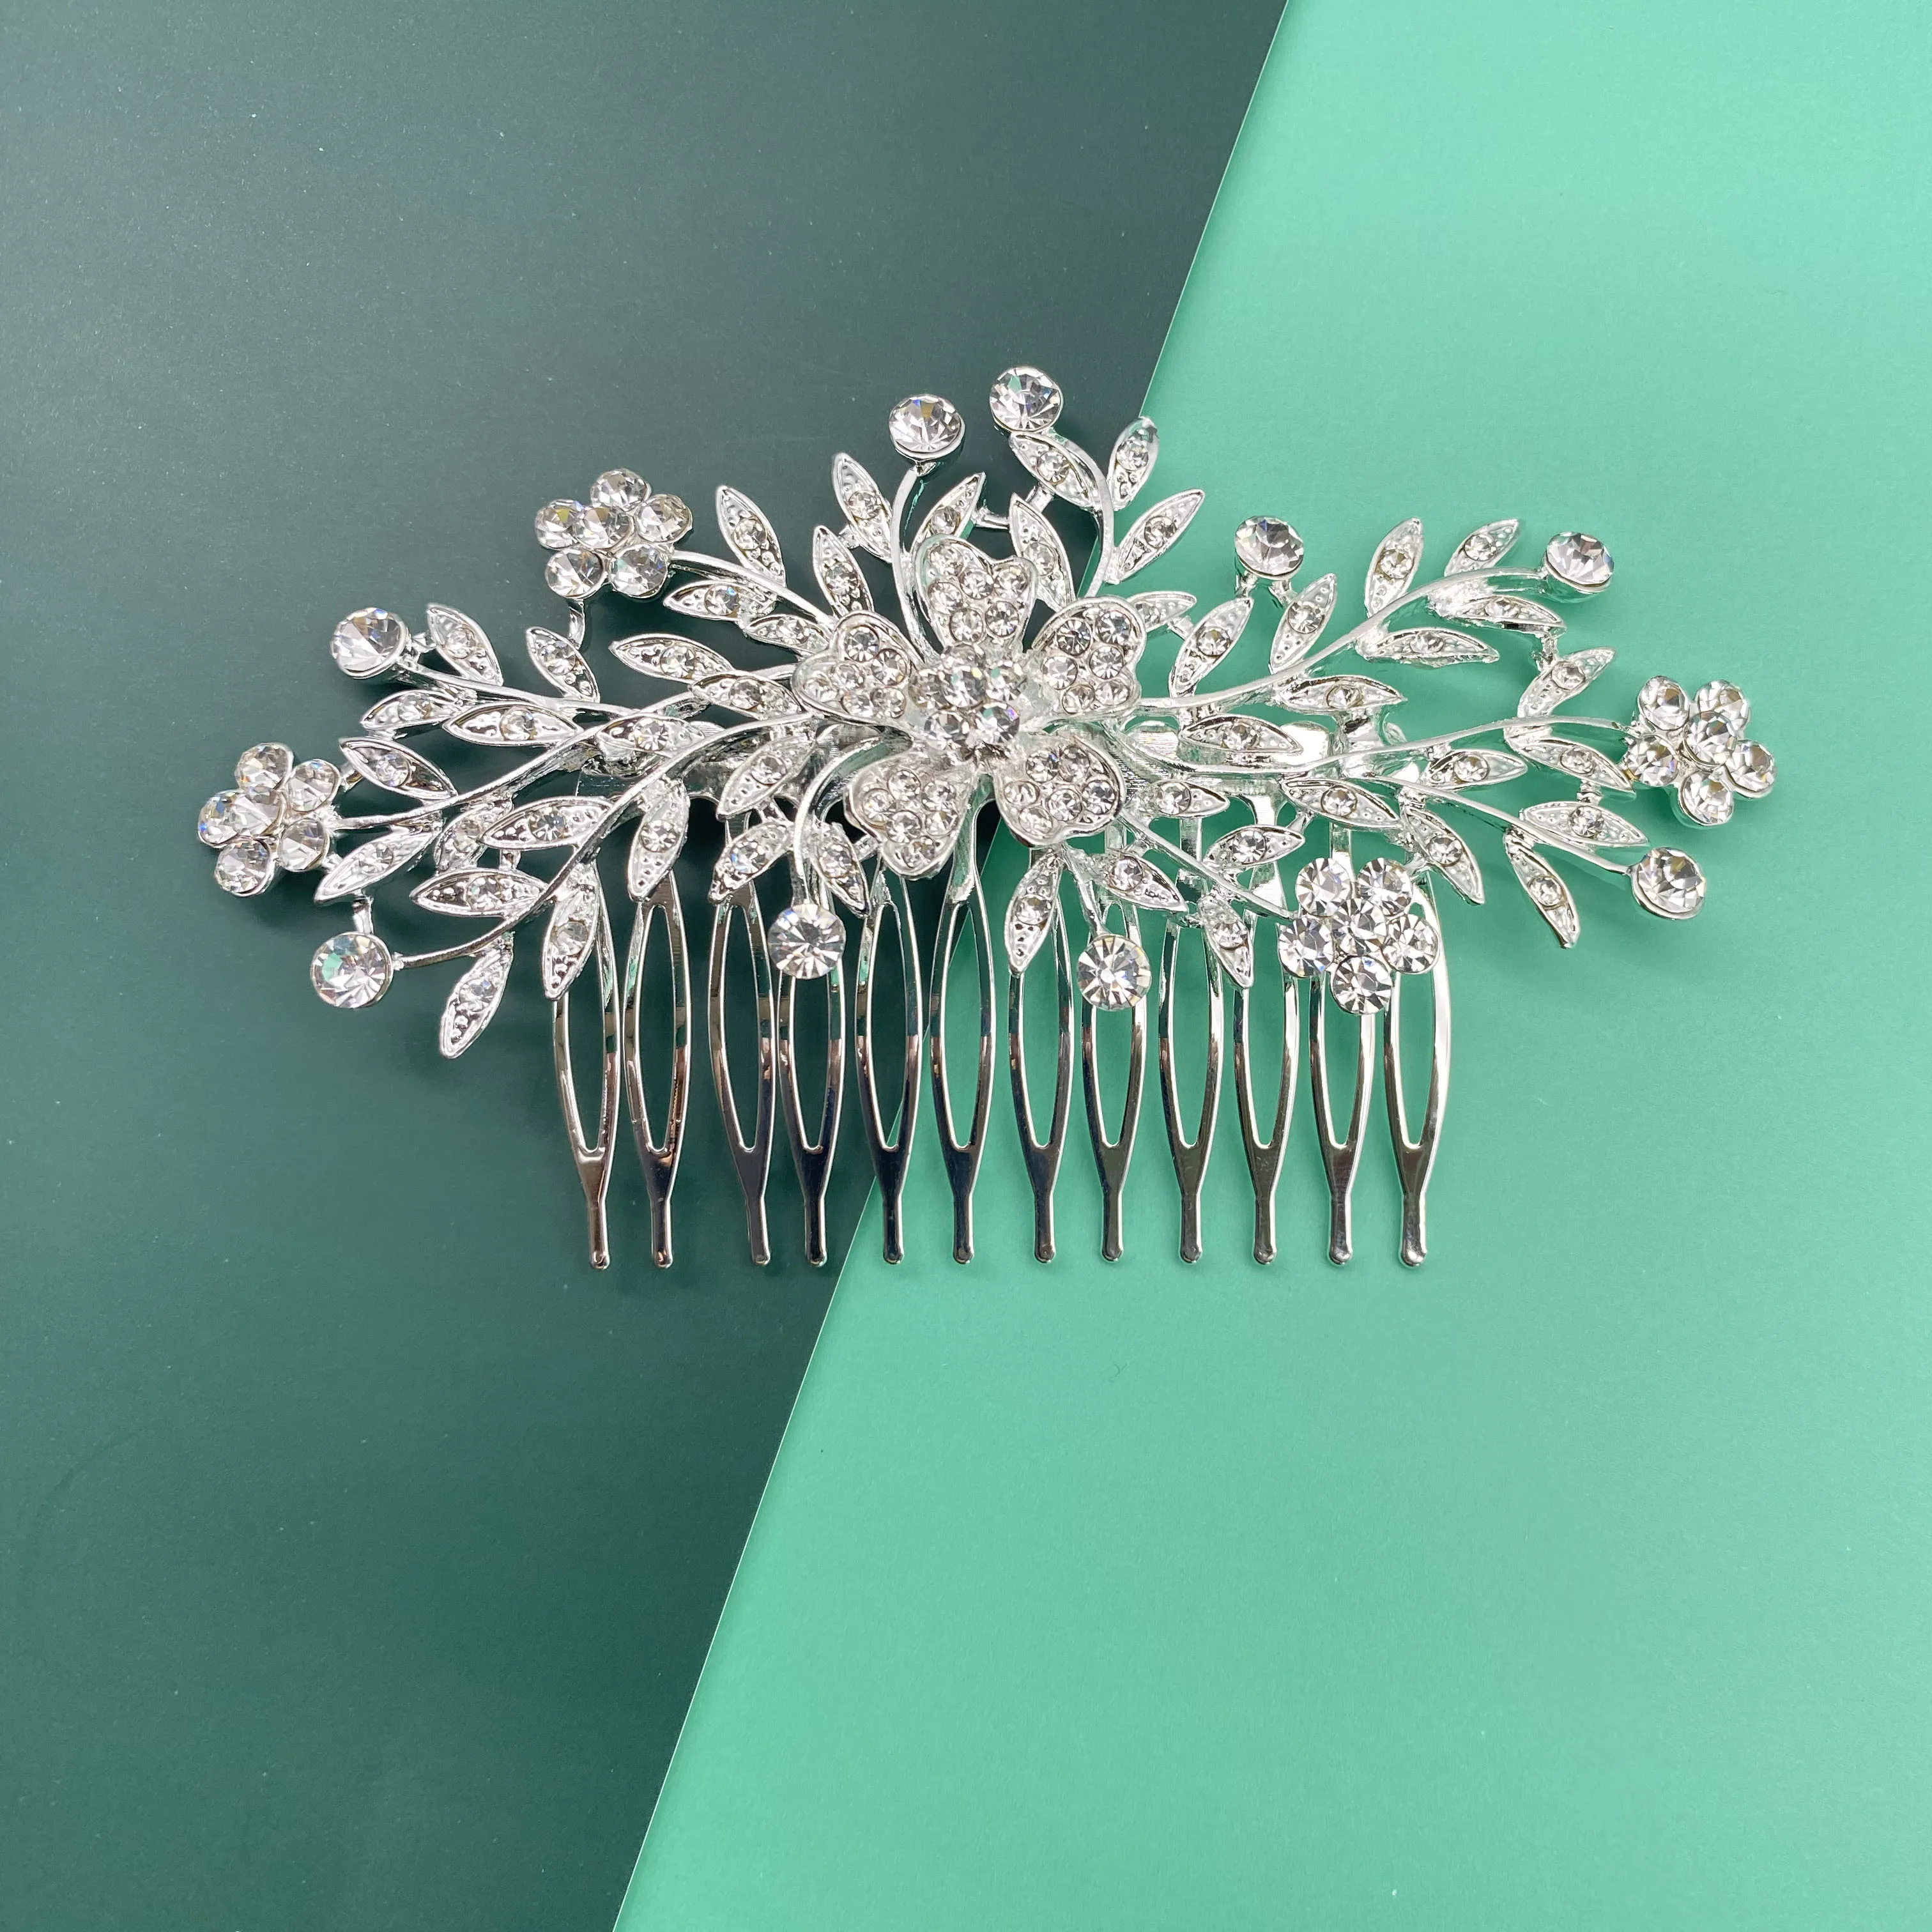 

Jachon New Style Jewelry Rhinestone Flower Bridal hair Comb Crystal Hair Combs Wedding Hair Accessories, As picture